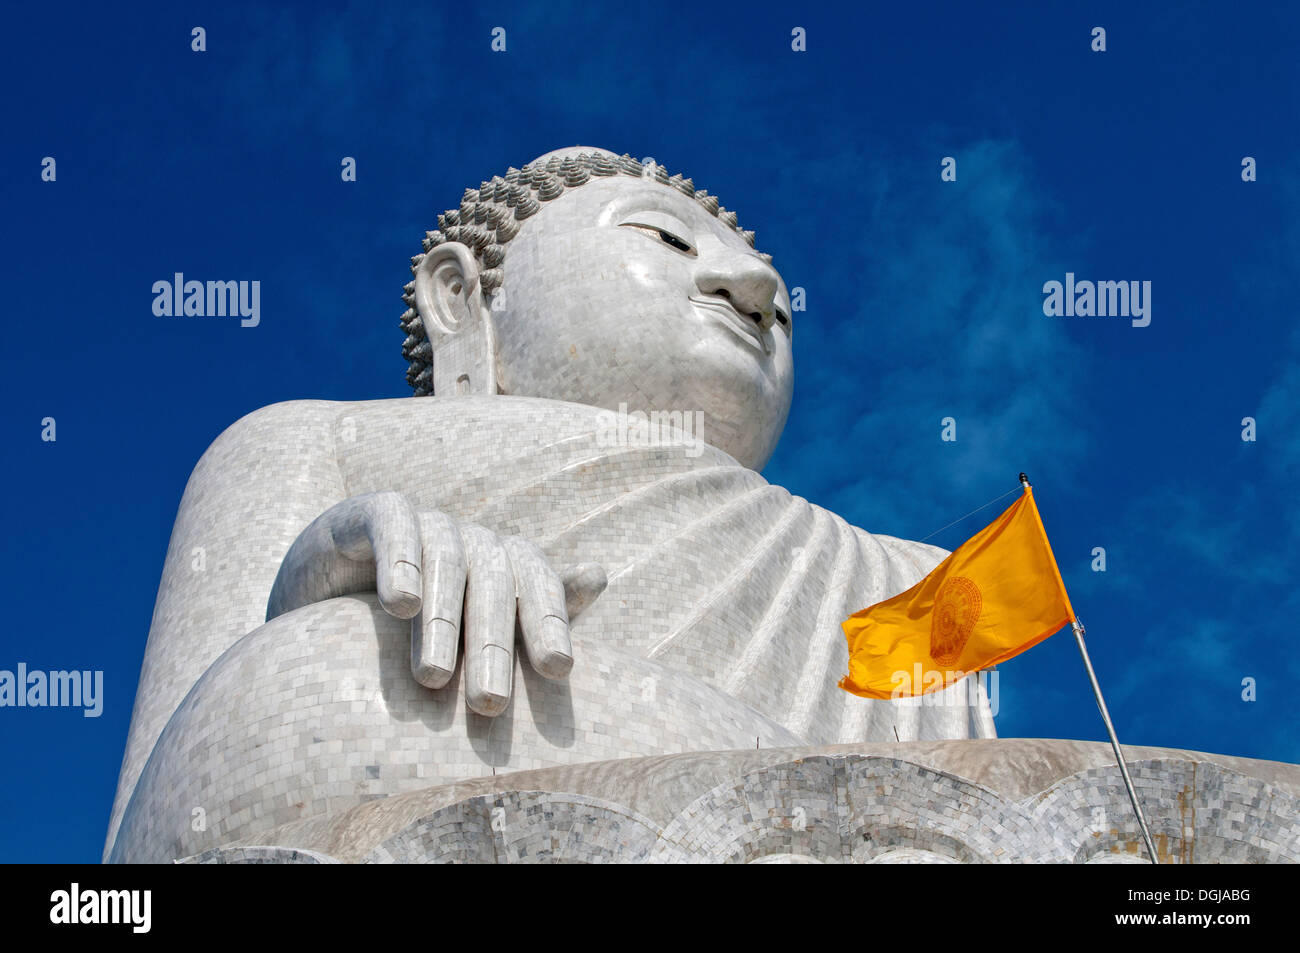 Great Buddha with a yellow Dharmacakra flag, Chalong, Phuket Province, Thailand Stock Photo